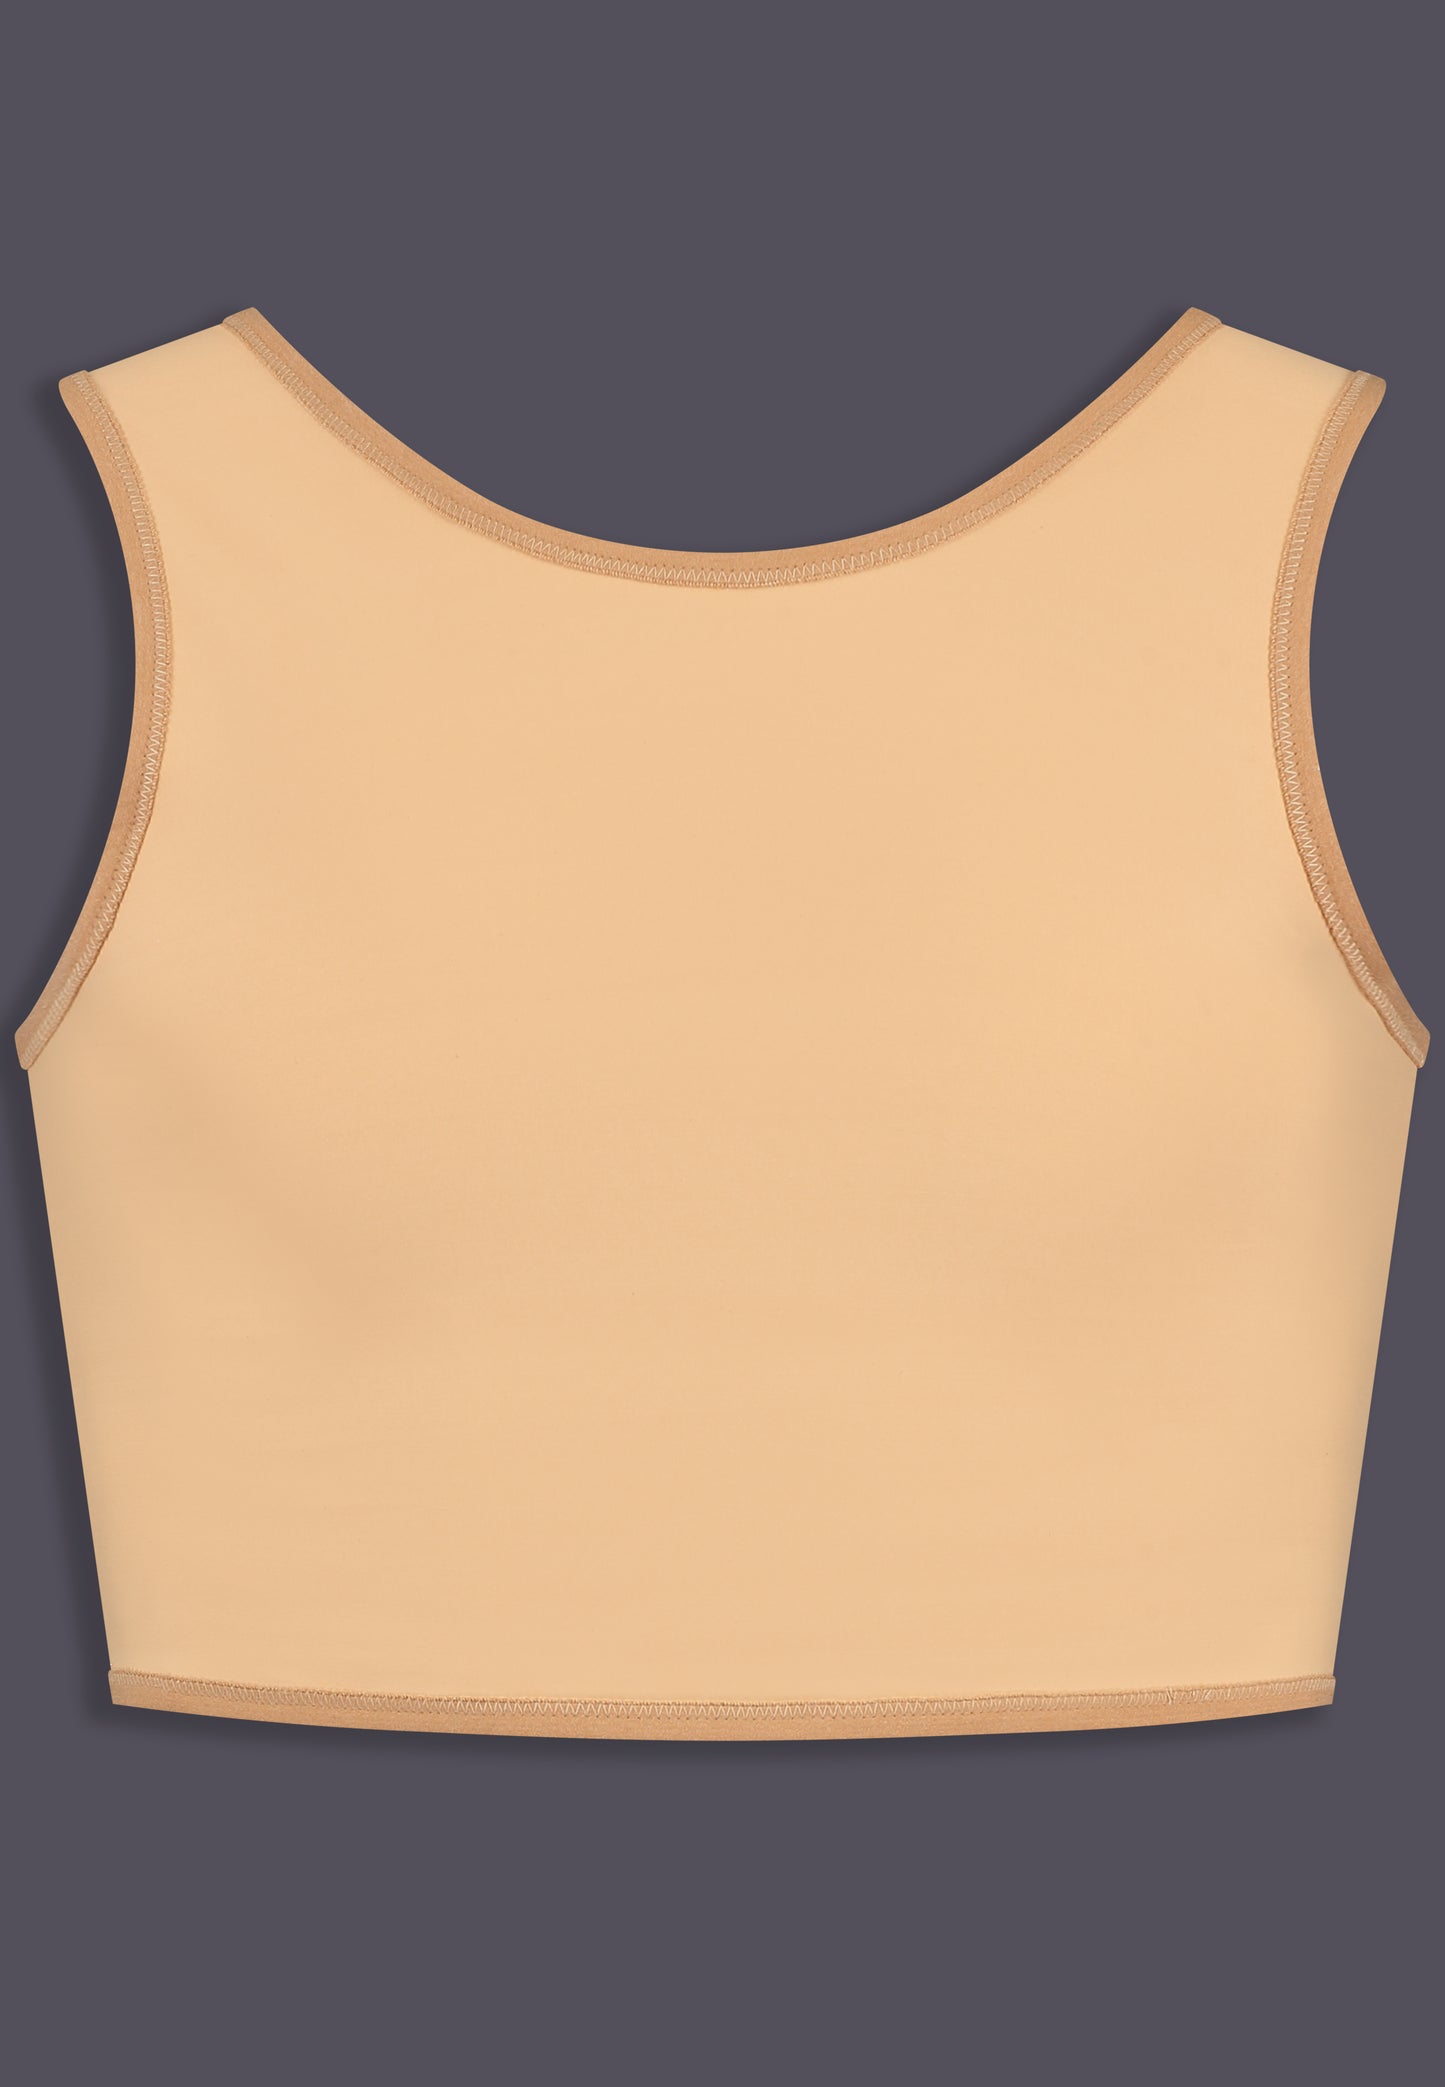 Gym Binder caramel front view by UNTAG